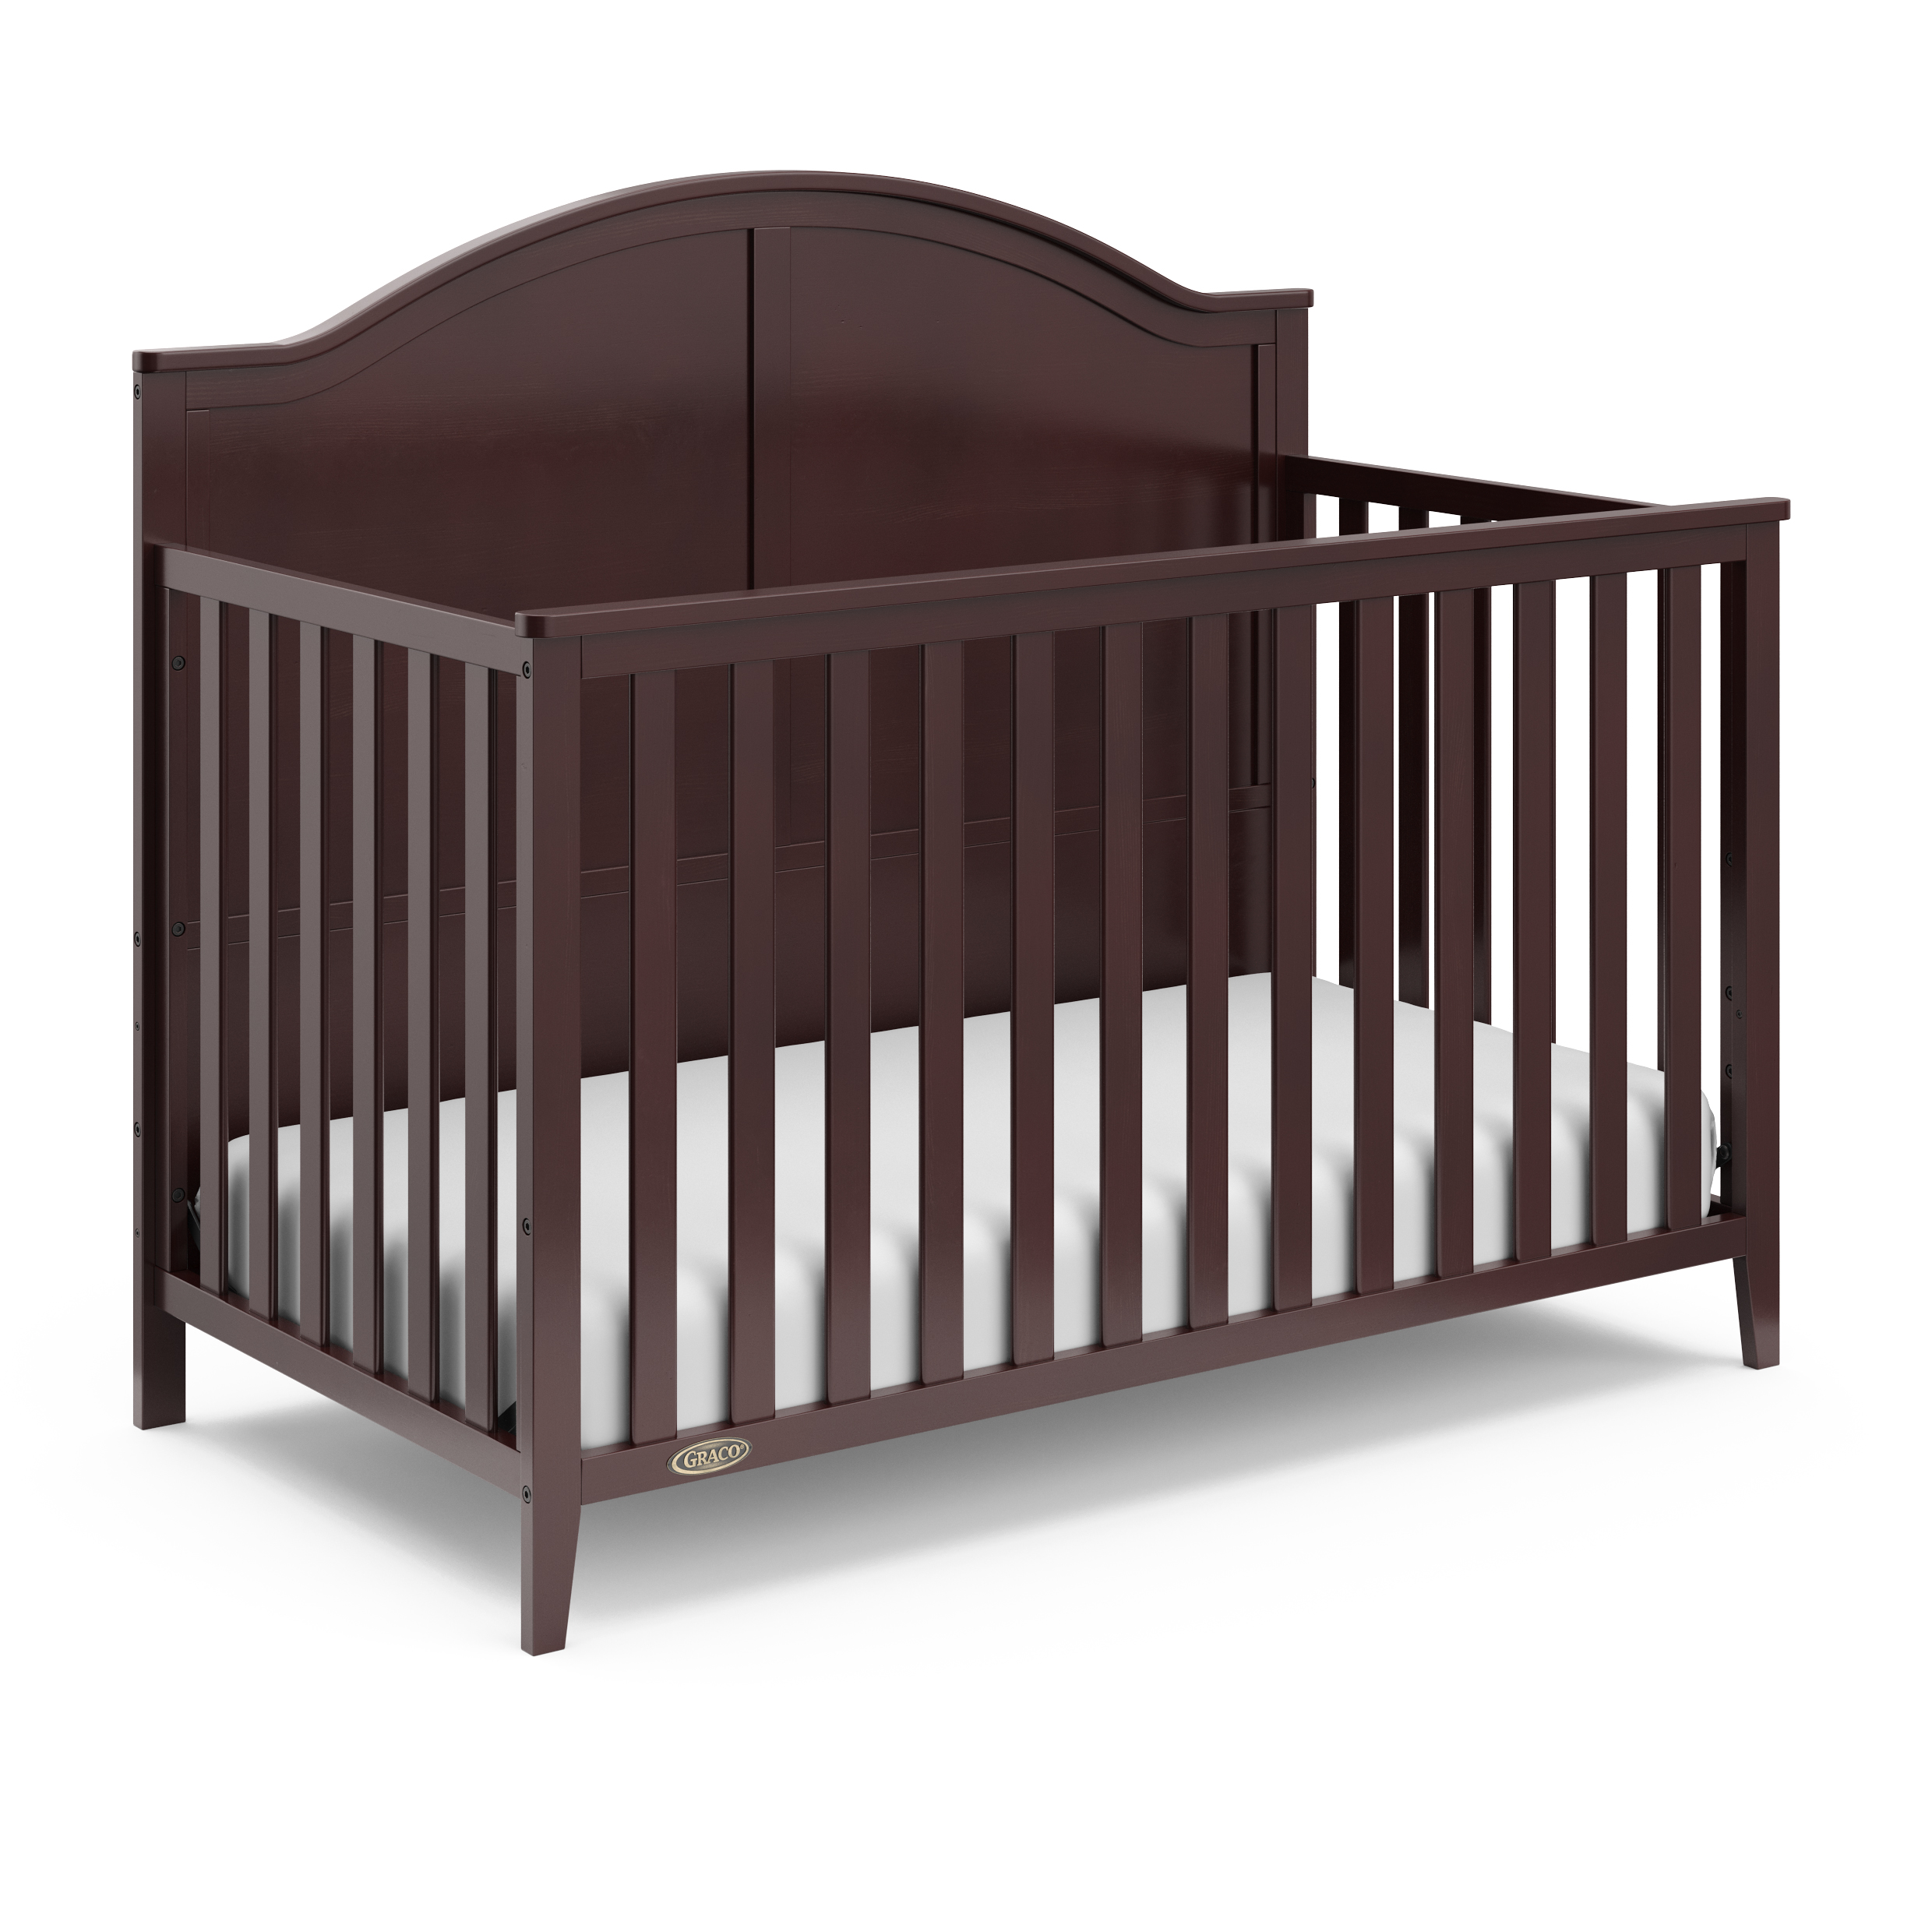 Graco Wilfred 5-in-1 Convertible Baby Crib, Espresso - image 1 of 12